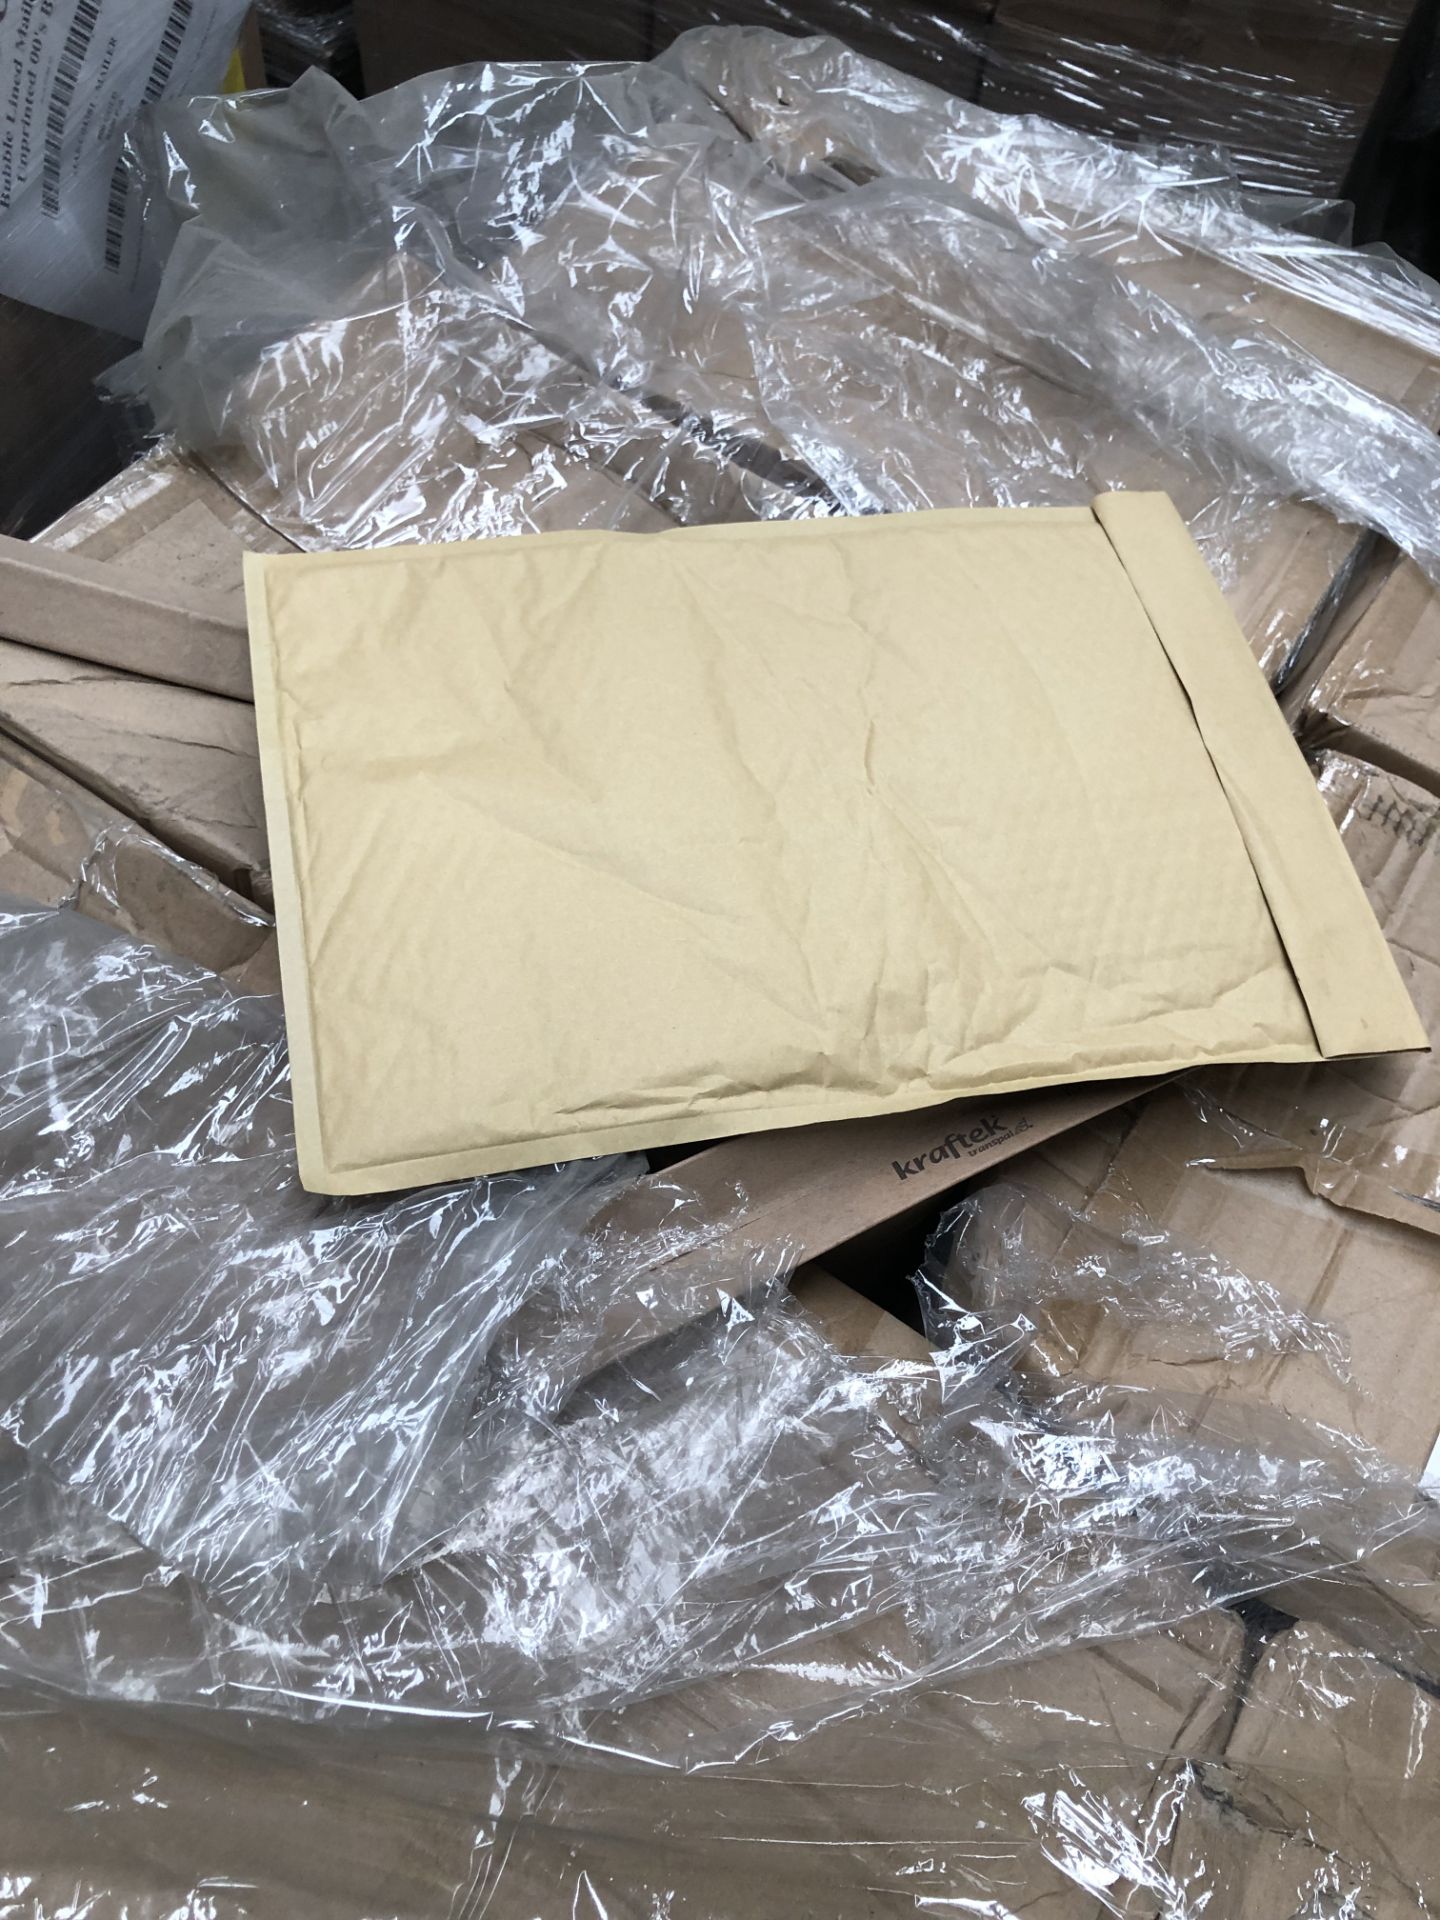 Approx. ½ Pallet of A3 Bubble Mailer, approx. 13 b - Image 2 of 2